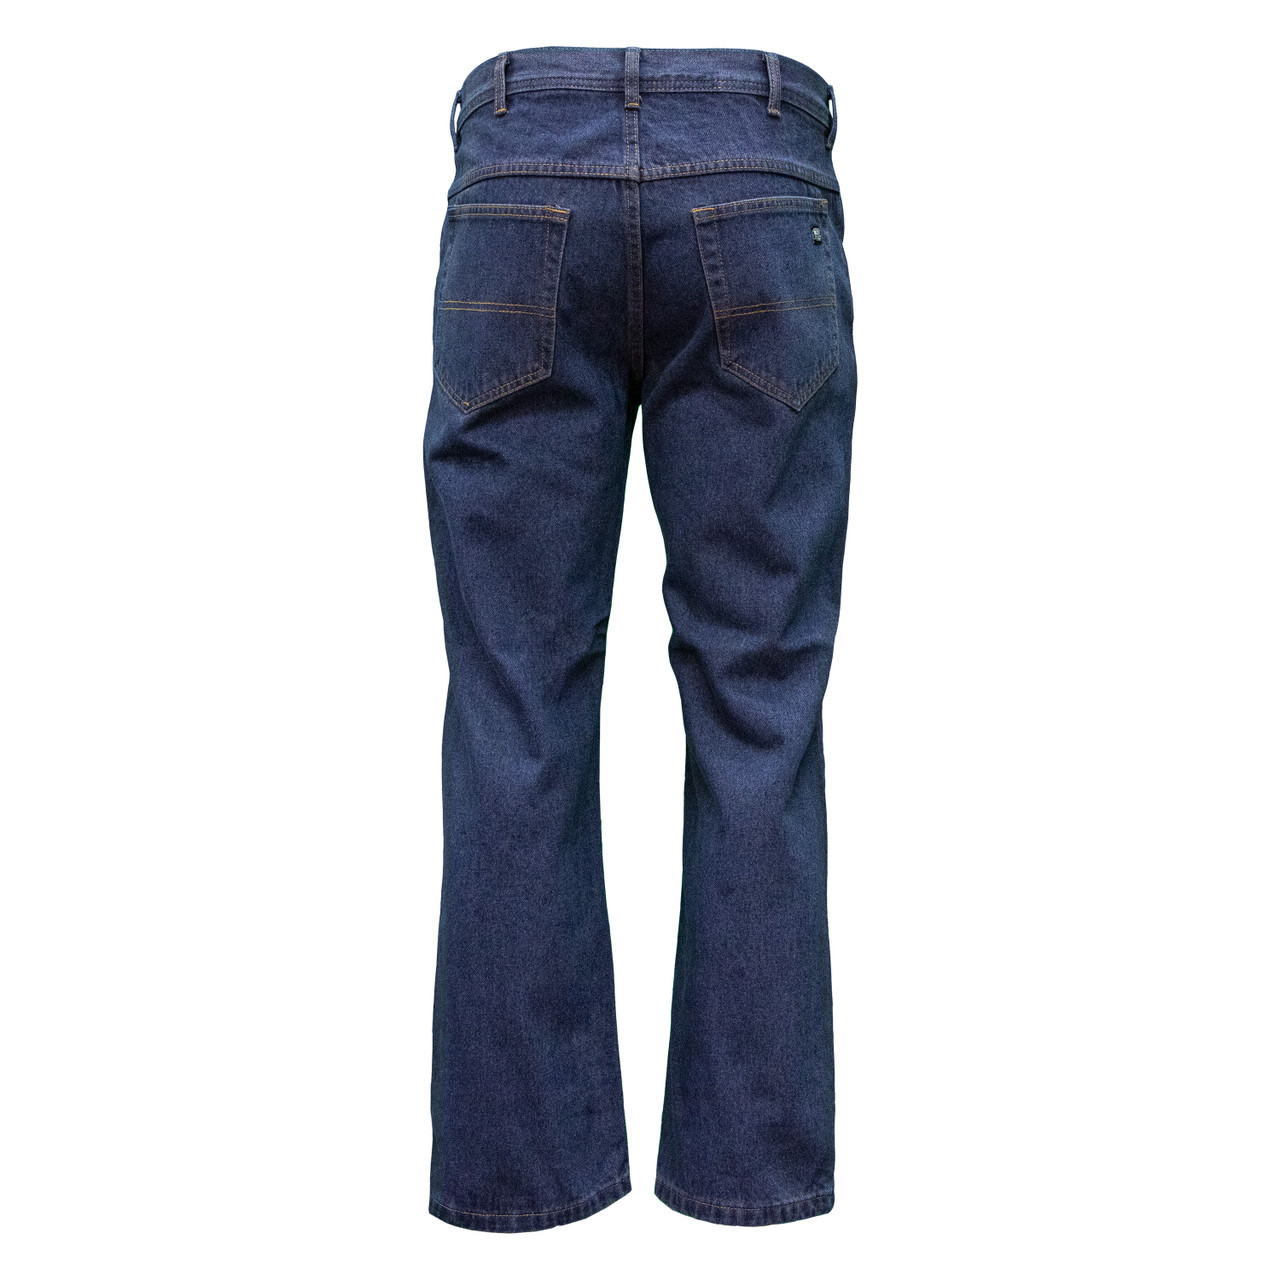 5-Pocket Traditional Fit Jean